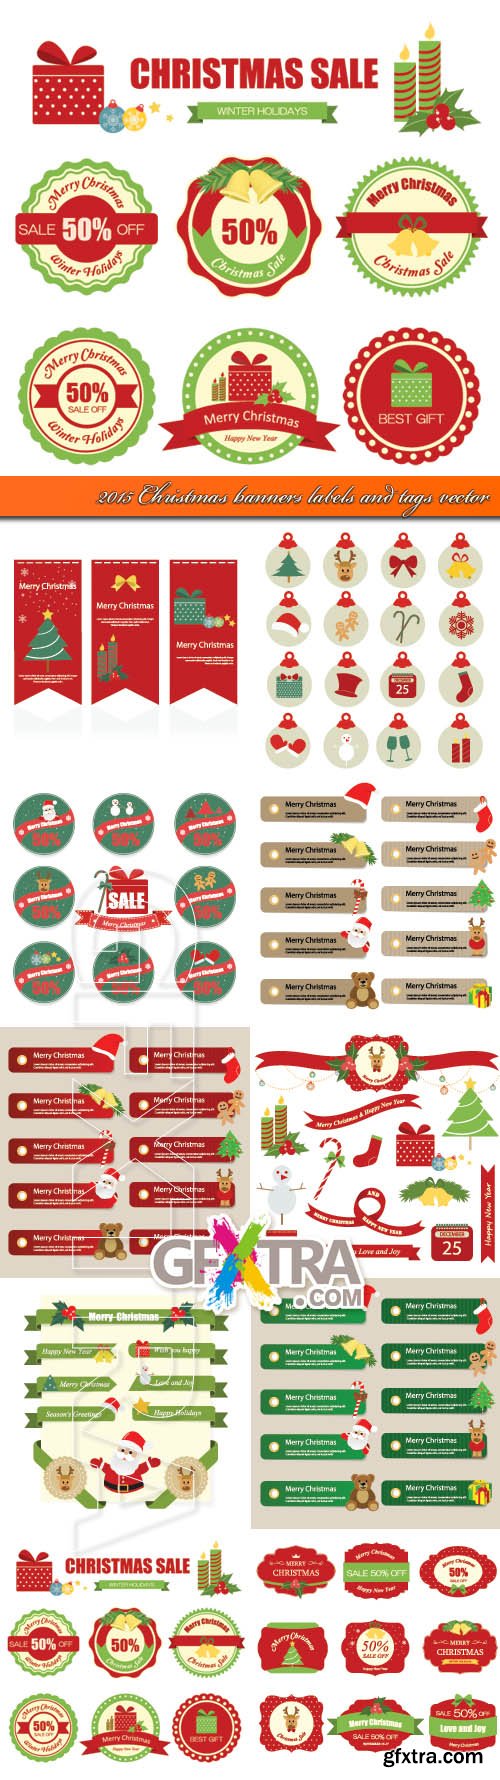 2015 Christmas banners labels and tags vector